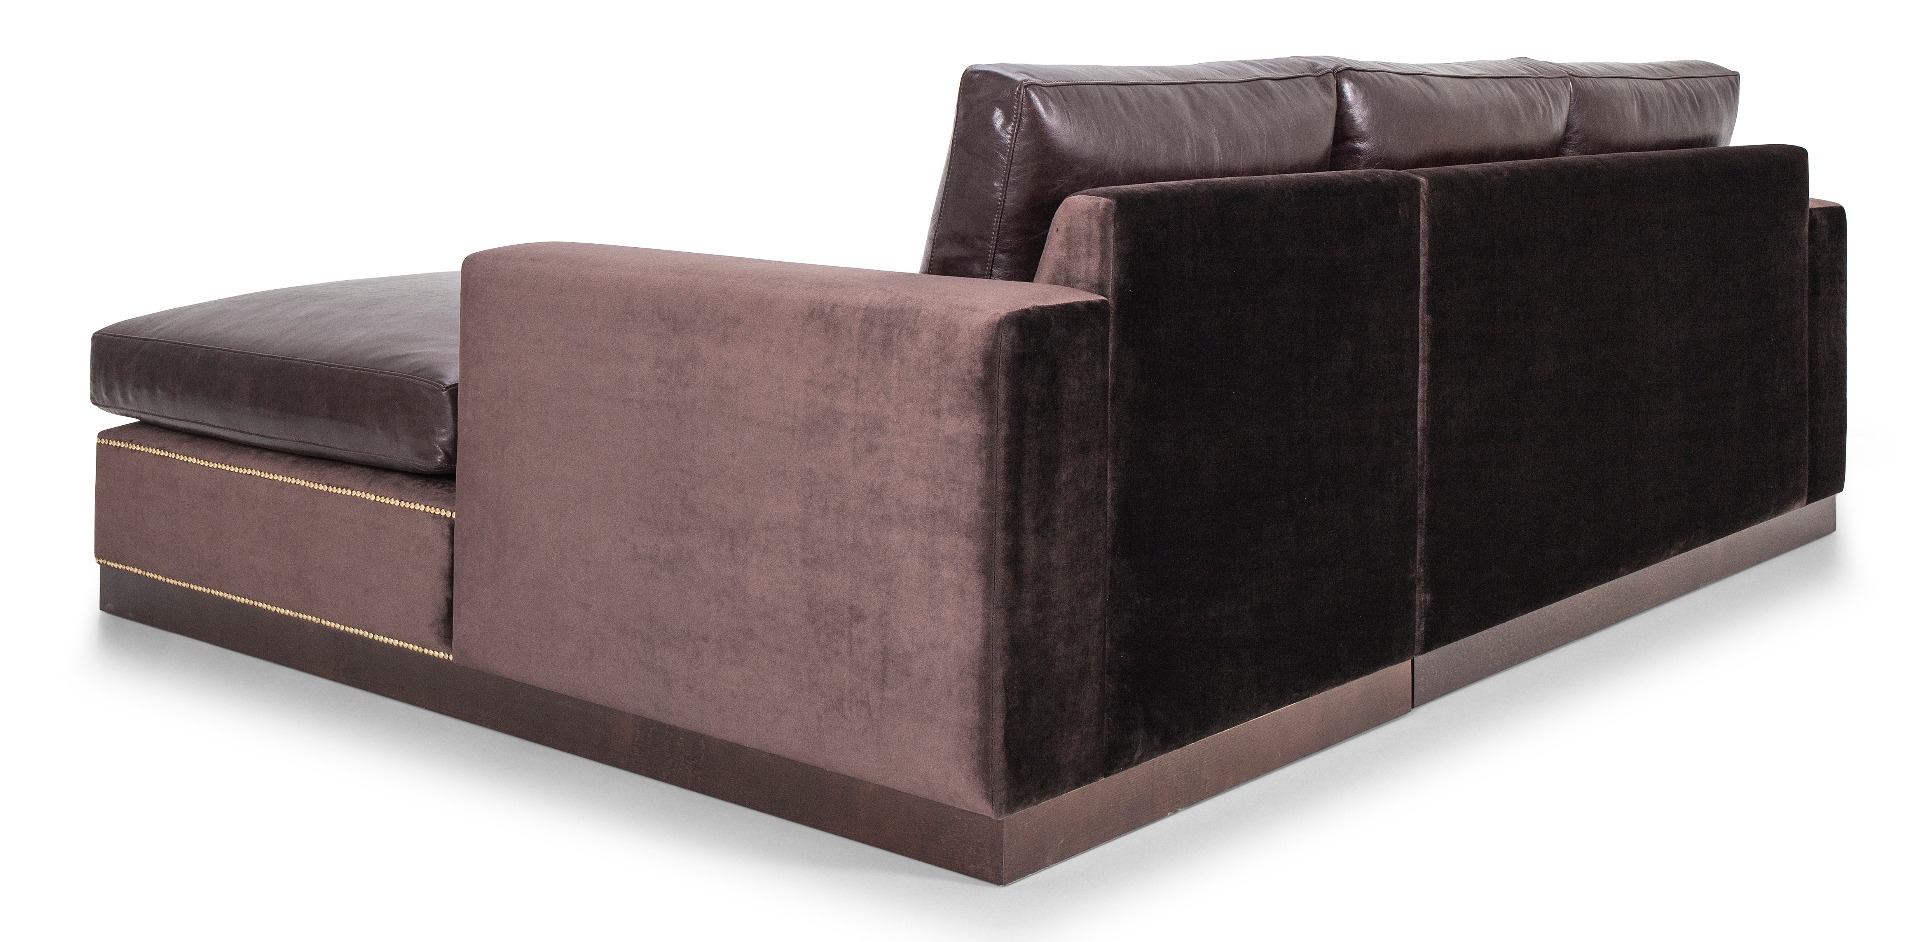 Luxury rich brown Omarz leather sofa by Luxuria London